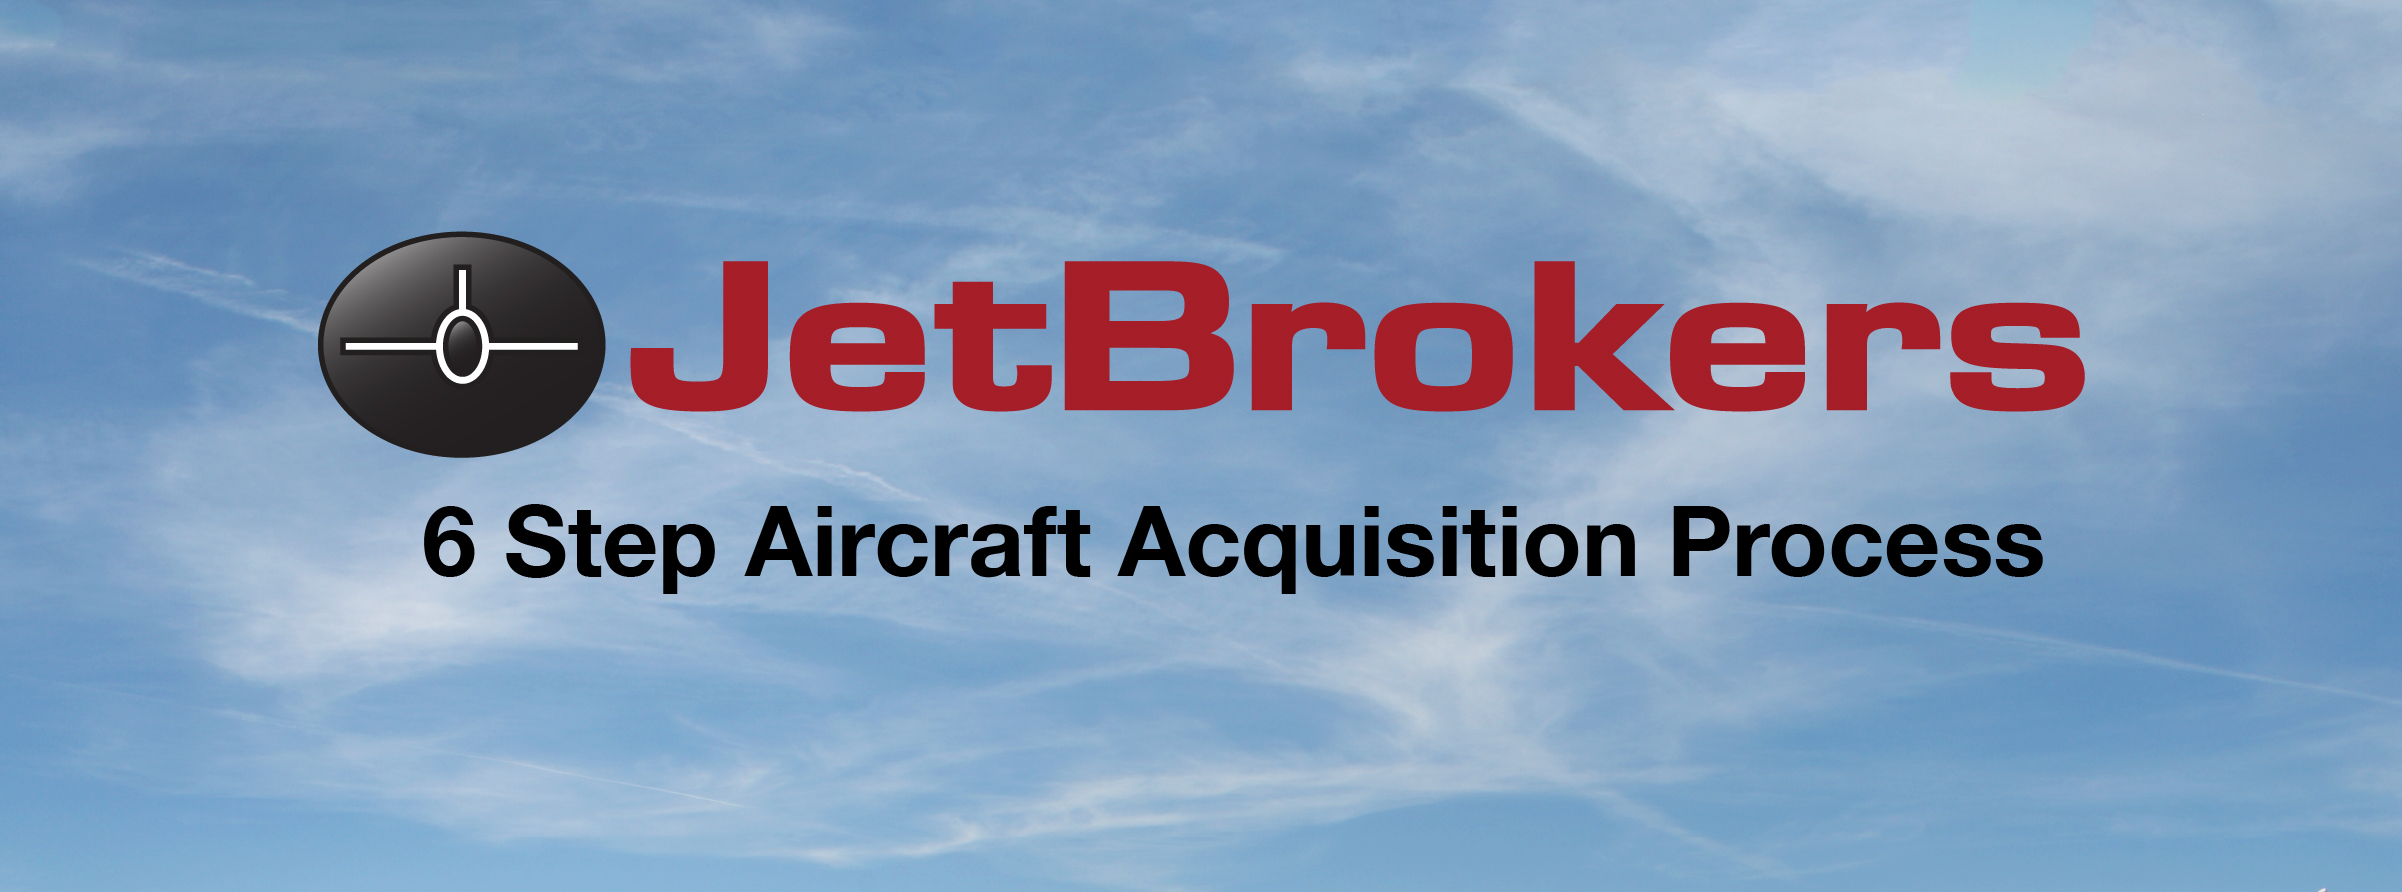 JetBrokers 6 Step Aircraft Acquisition Process